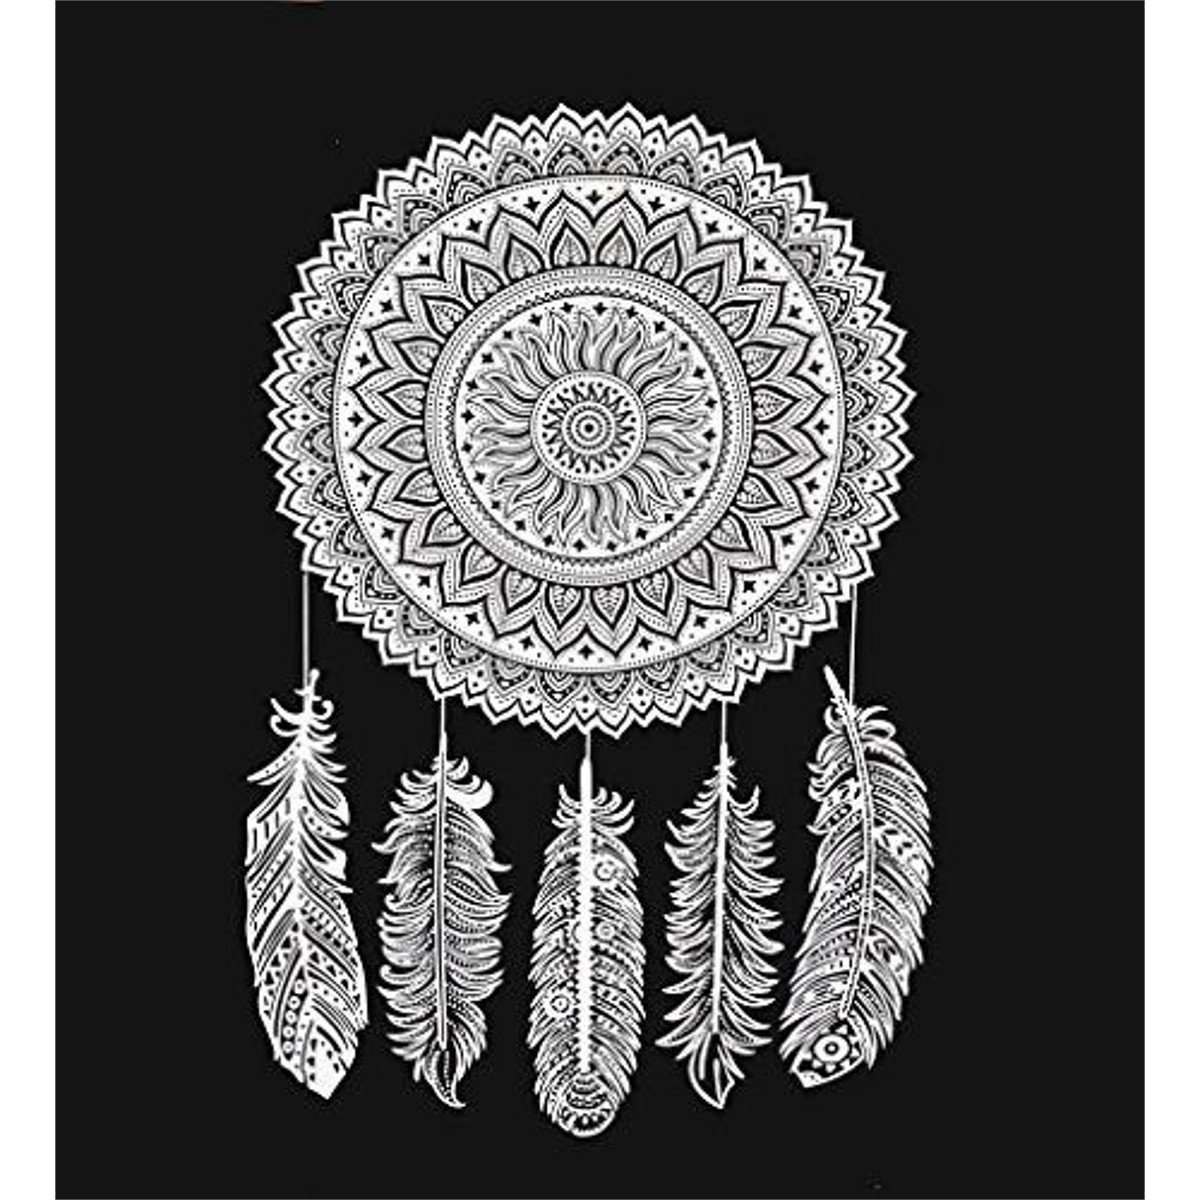 

210x145cm Dream Catcher Black And White Mandala Tapestry Wall Hanging Indian Cotton Blanket